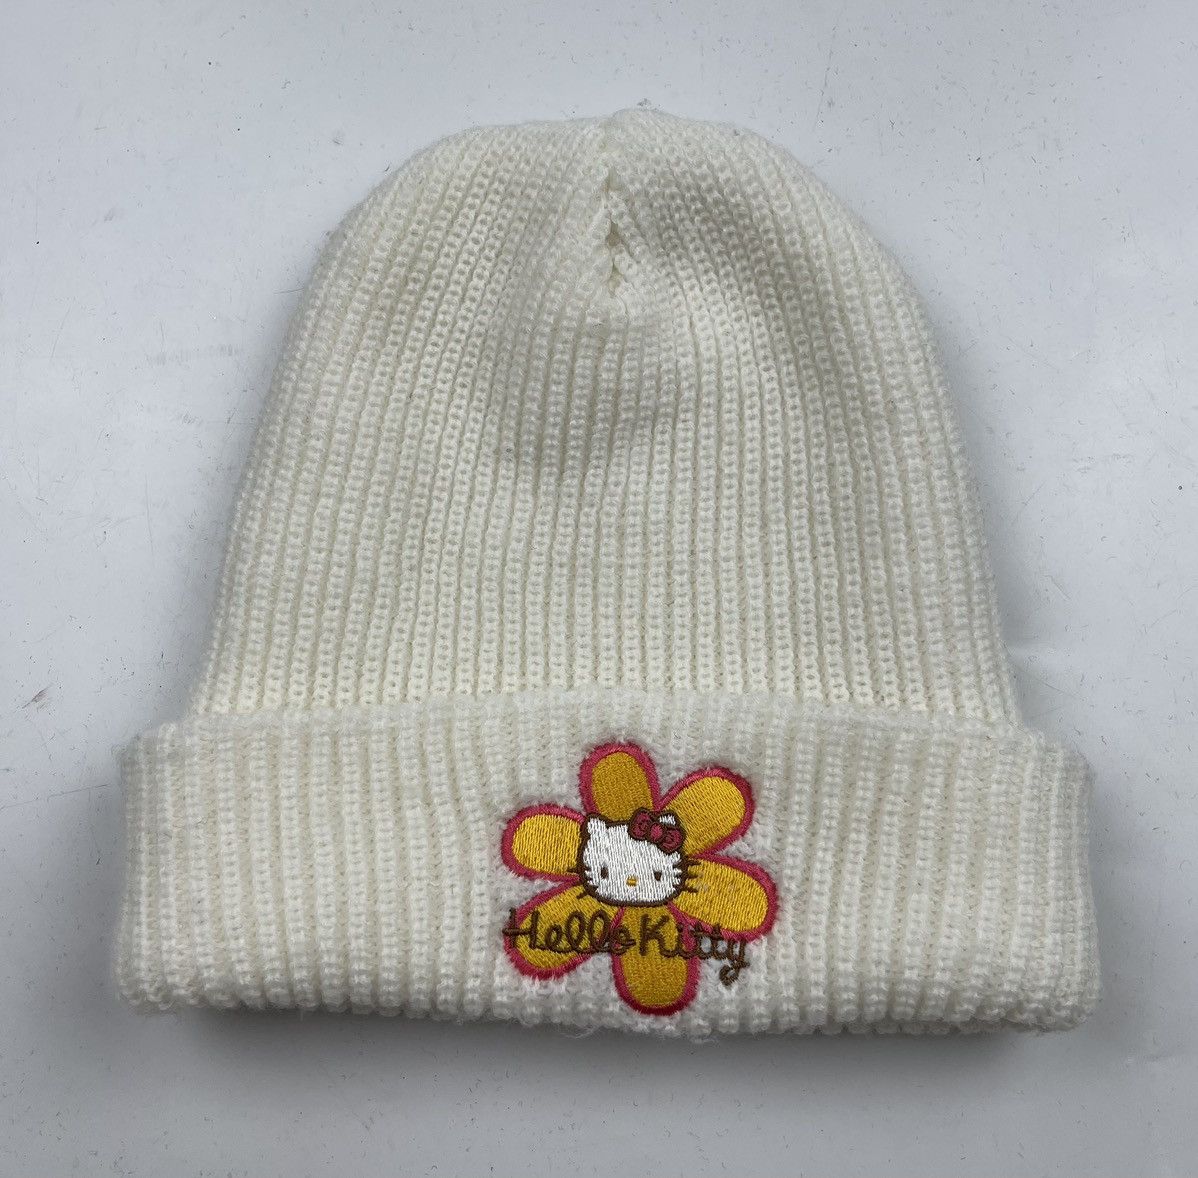 Japanese Brand - made in canada hello kitty beanie hat snow cap tc14 - 2